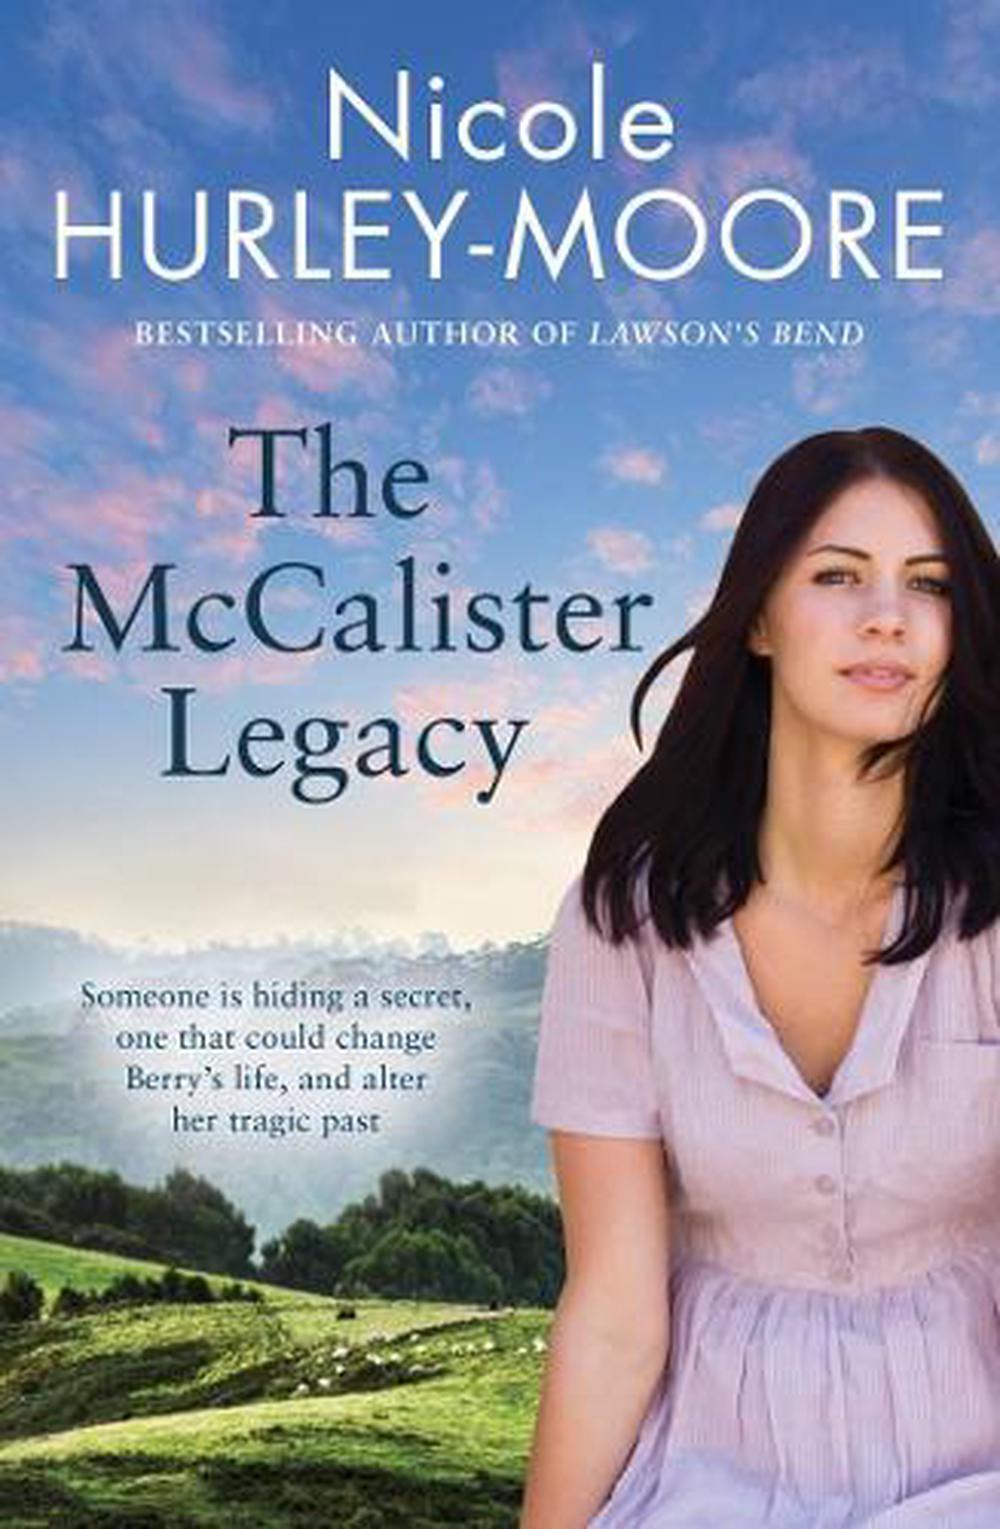 The Mccalister Legacy by Nicole Hurley-Moore (English) Paperback Book ...